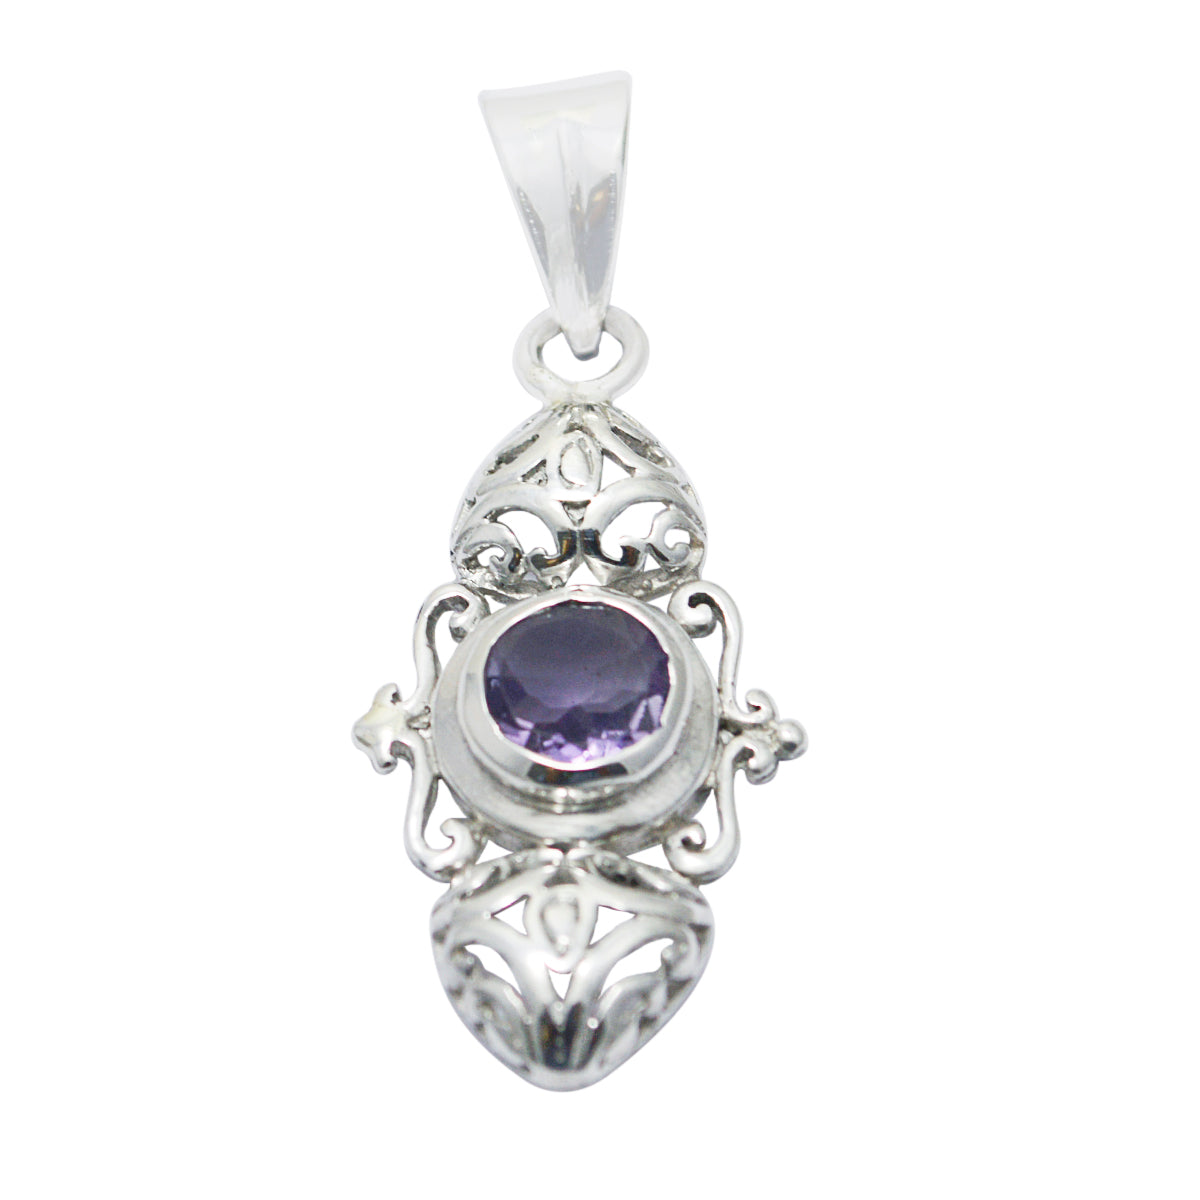 Riyo Good Gemstones Round Faceted Purple Amethyst Sterling Silver Pendant gift for easter Sunday